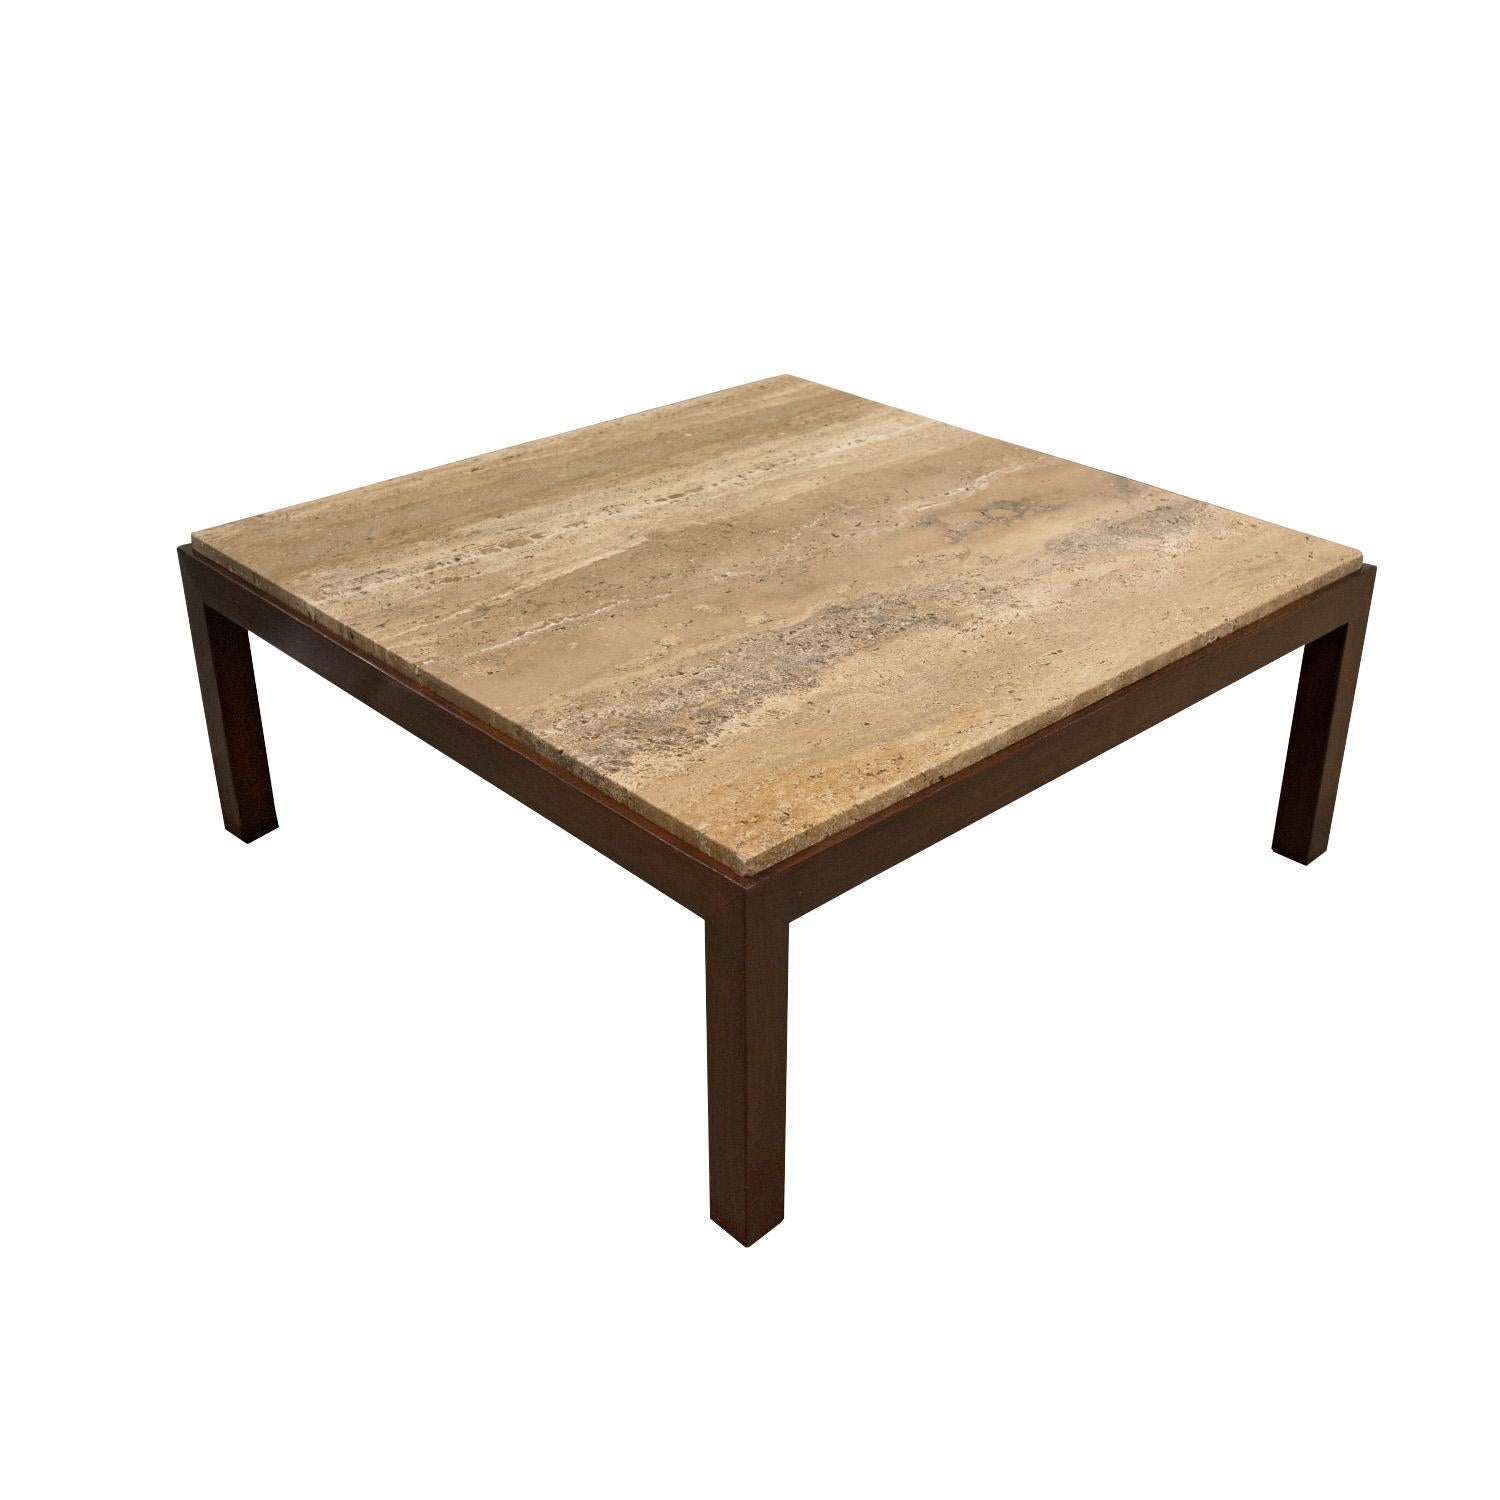 Mid-Century Modern Edward Wormley Coffee Table with Italian Travertine Top 1952 'Signed' For Sale